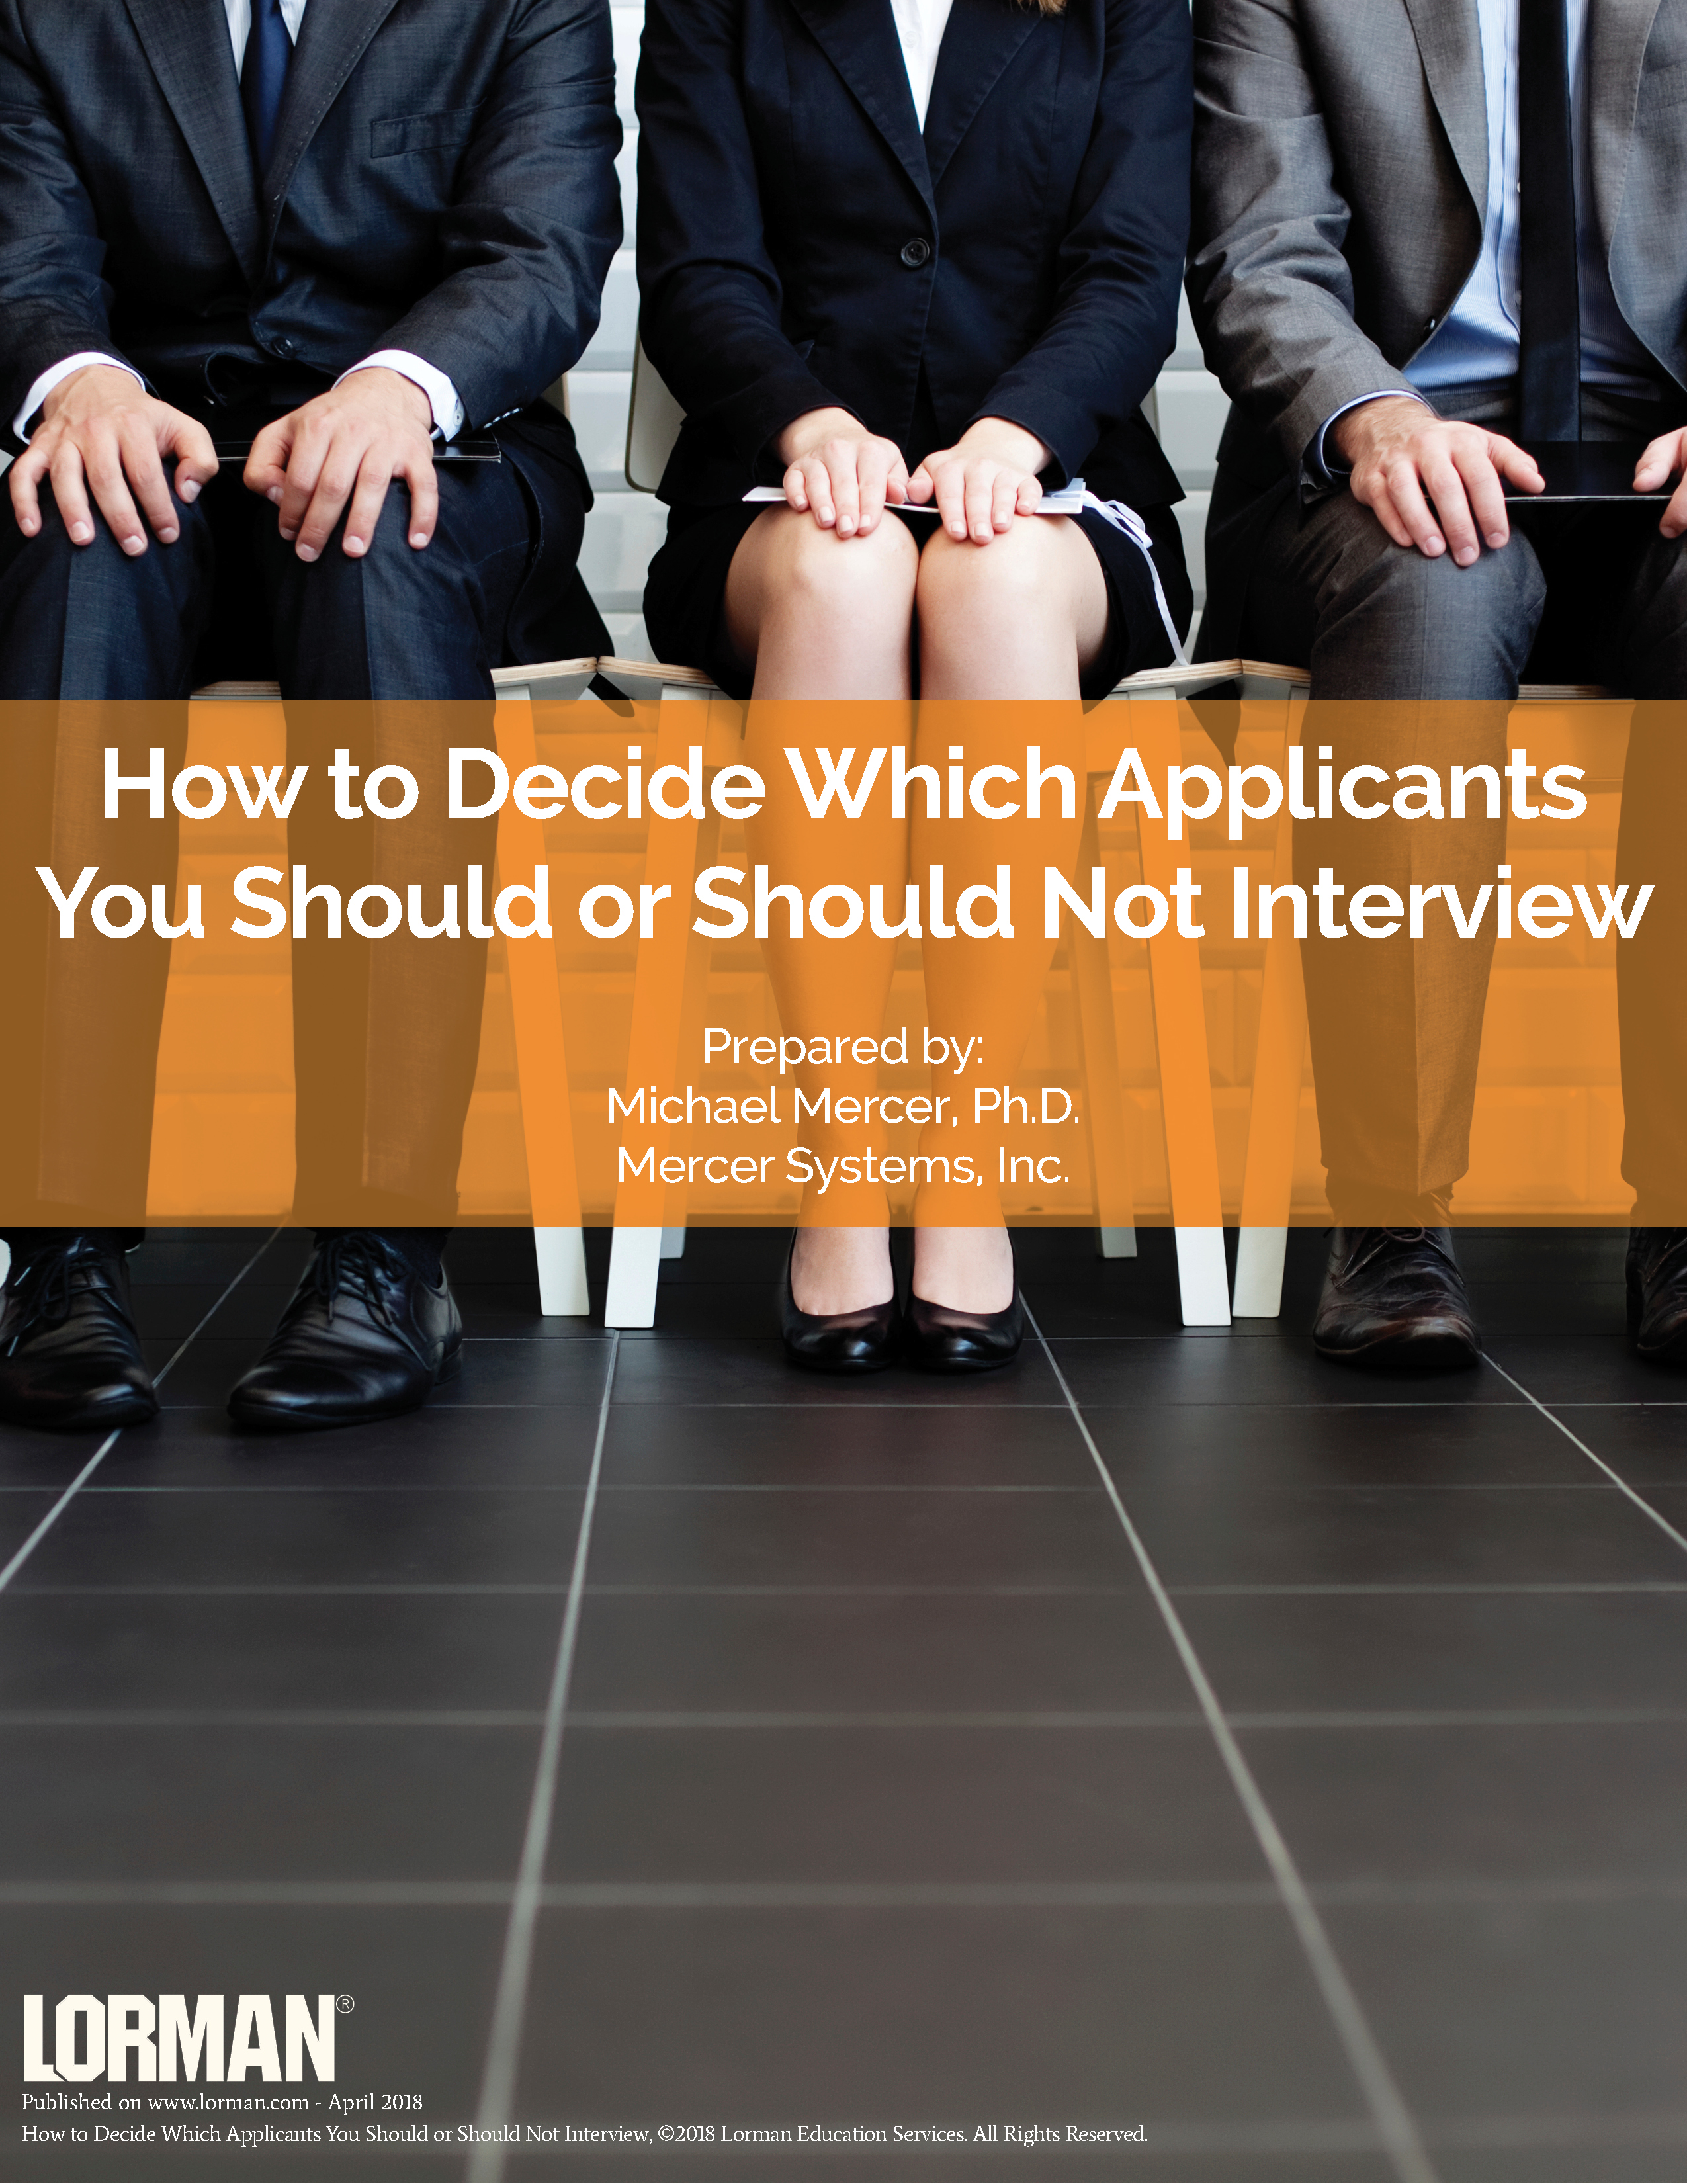 How to Decide Which Applicants You Should or Should Not Interview